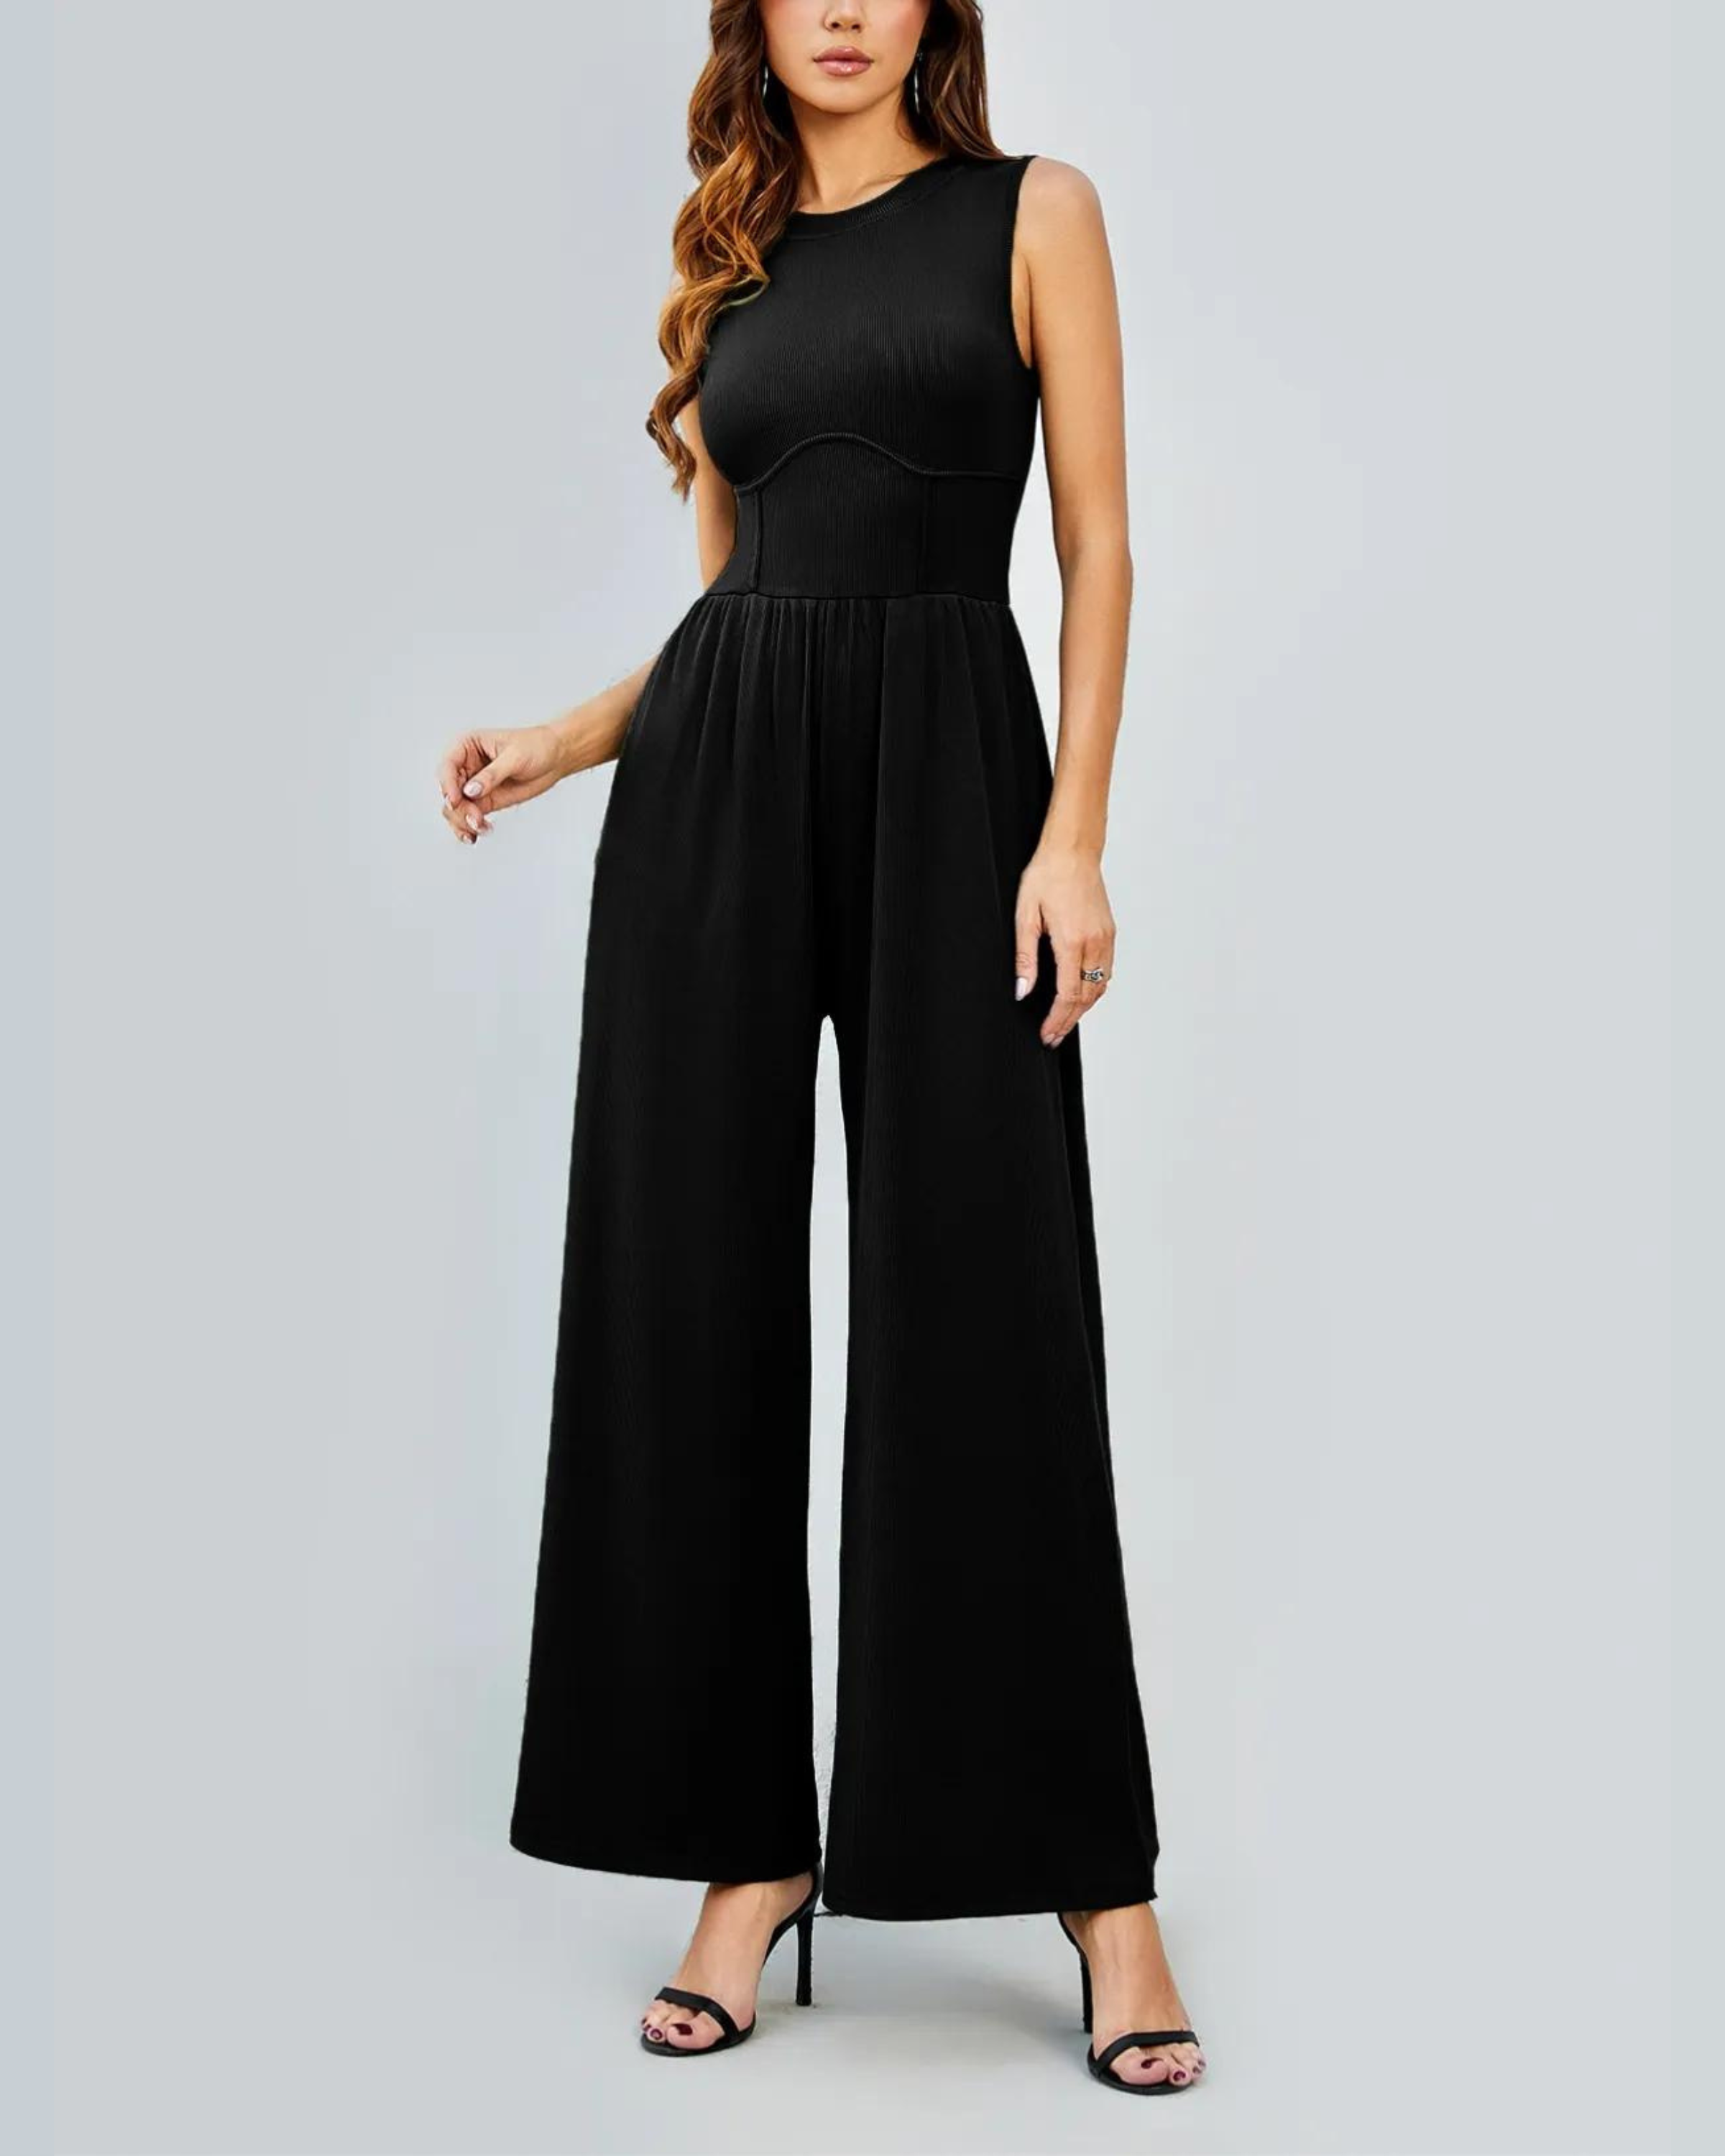 DIANA - CASUAL SUMMER JUMPSUIT